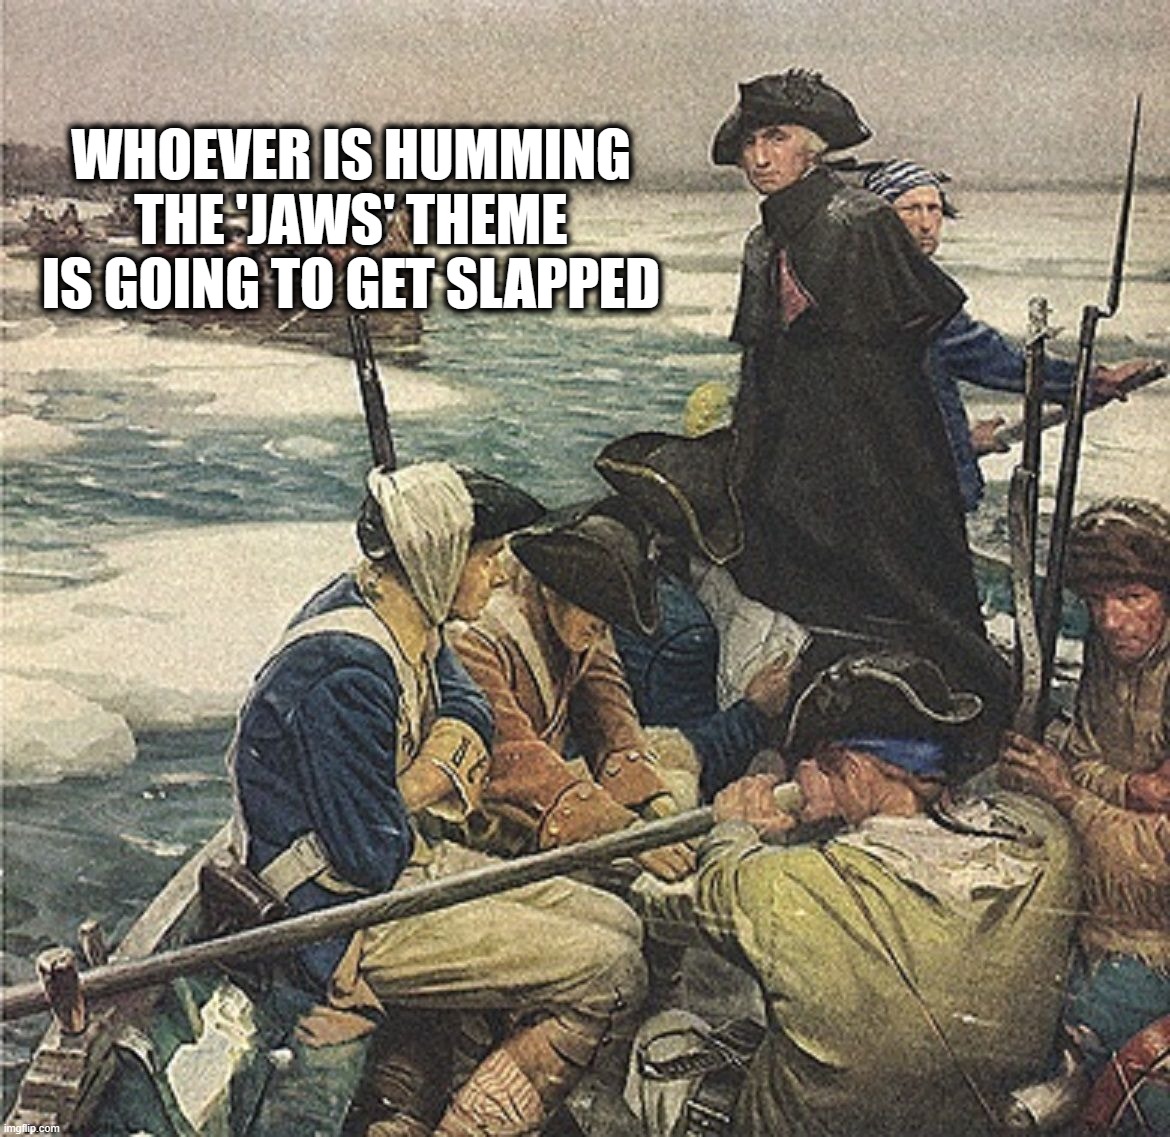 Jaws Theme | WHOEVER IS HUMMING THE 'JAWS' THEME IS GOING TO GET SLAPPED | image tagged in washington,delaware,jaws theme | made w/ Imgflip meme maker